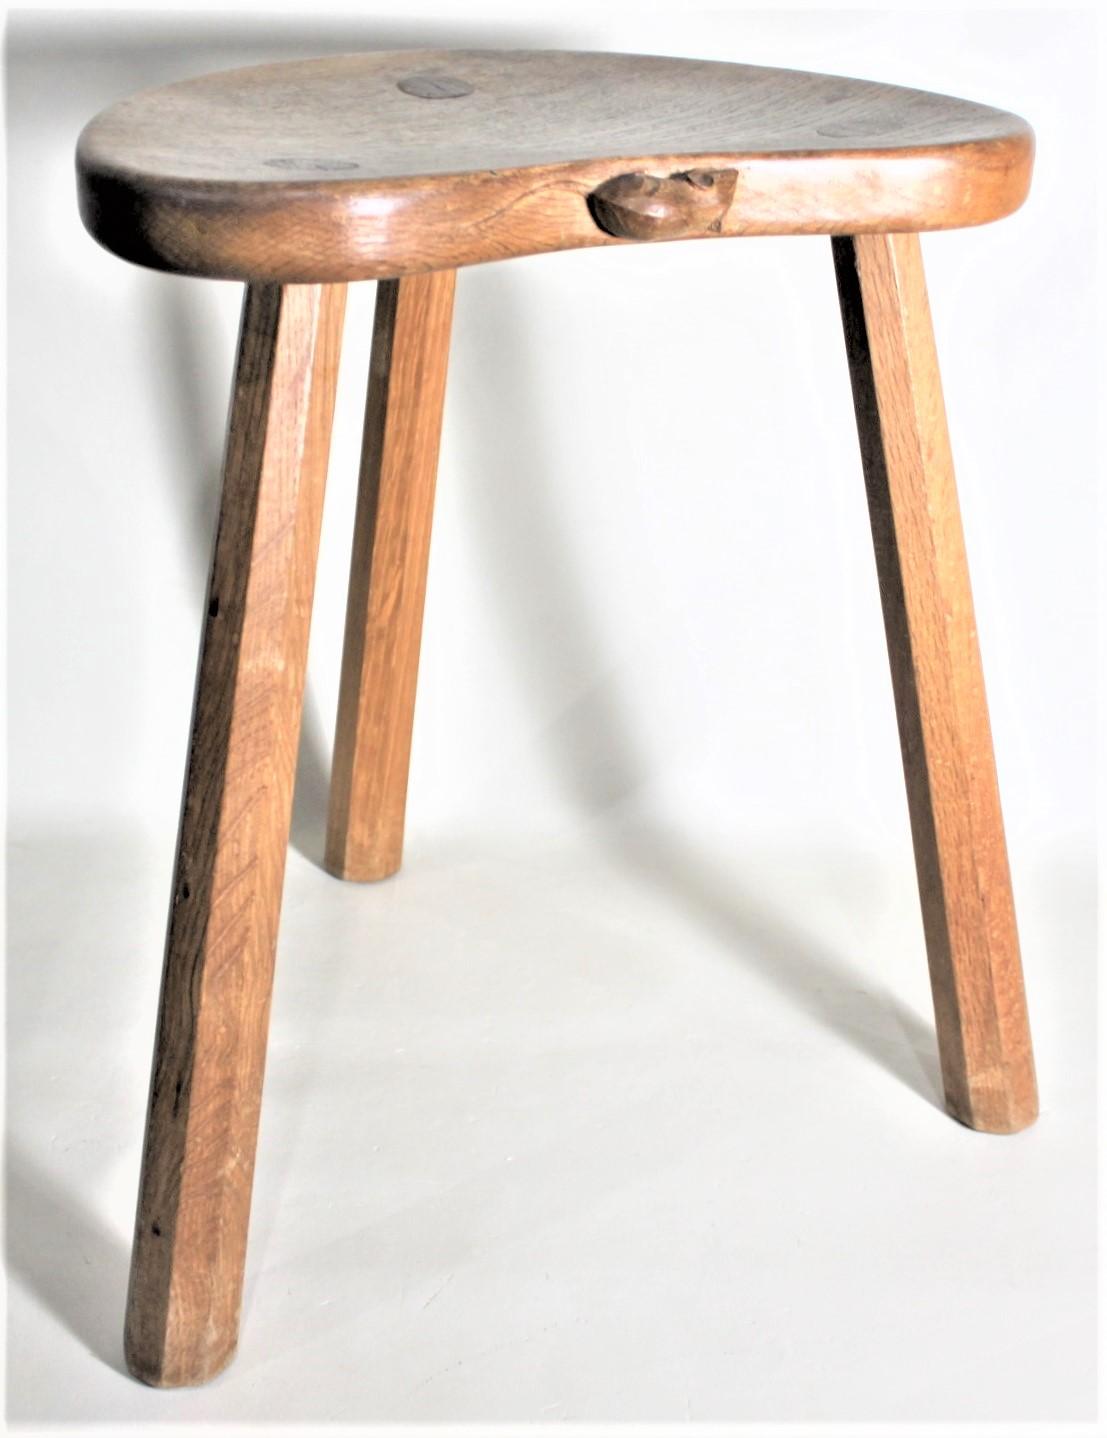 This vintage solid oak three legged milking stool was made by the renowned English furniture maker Robert 'Mouseman' Thompson in his signature folk art style and dates from circa 1960. The stool has a kidney shaped solid oak top with a slight